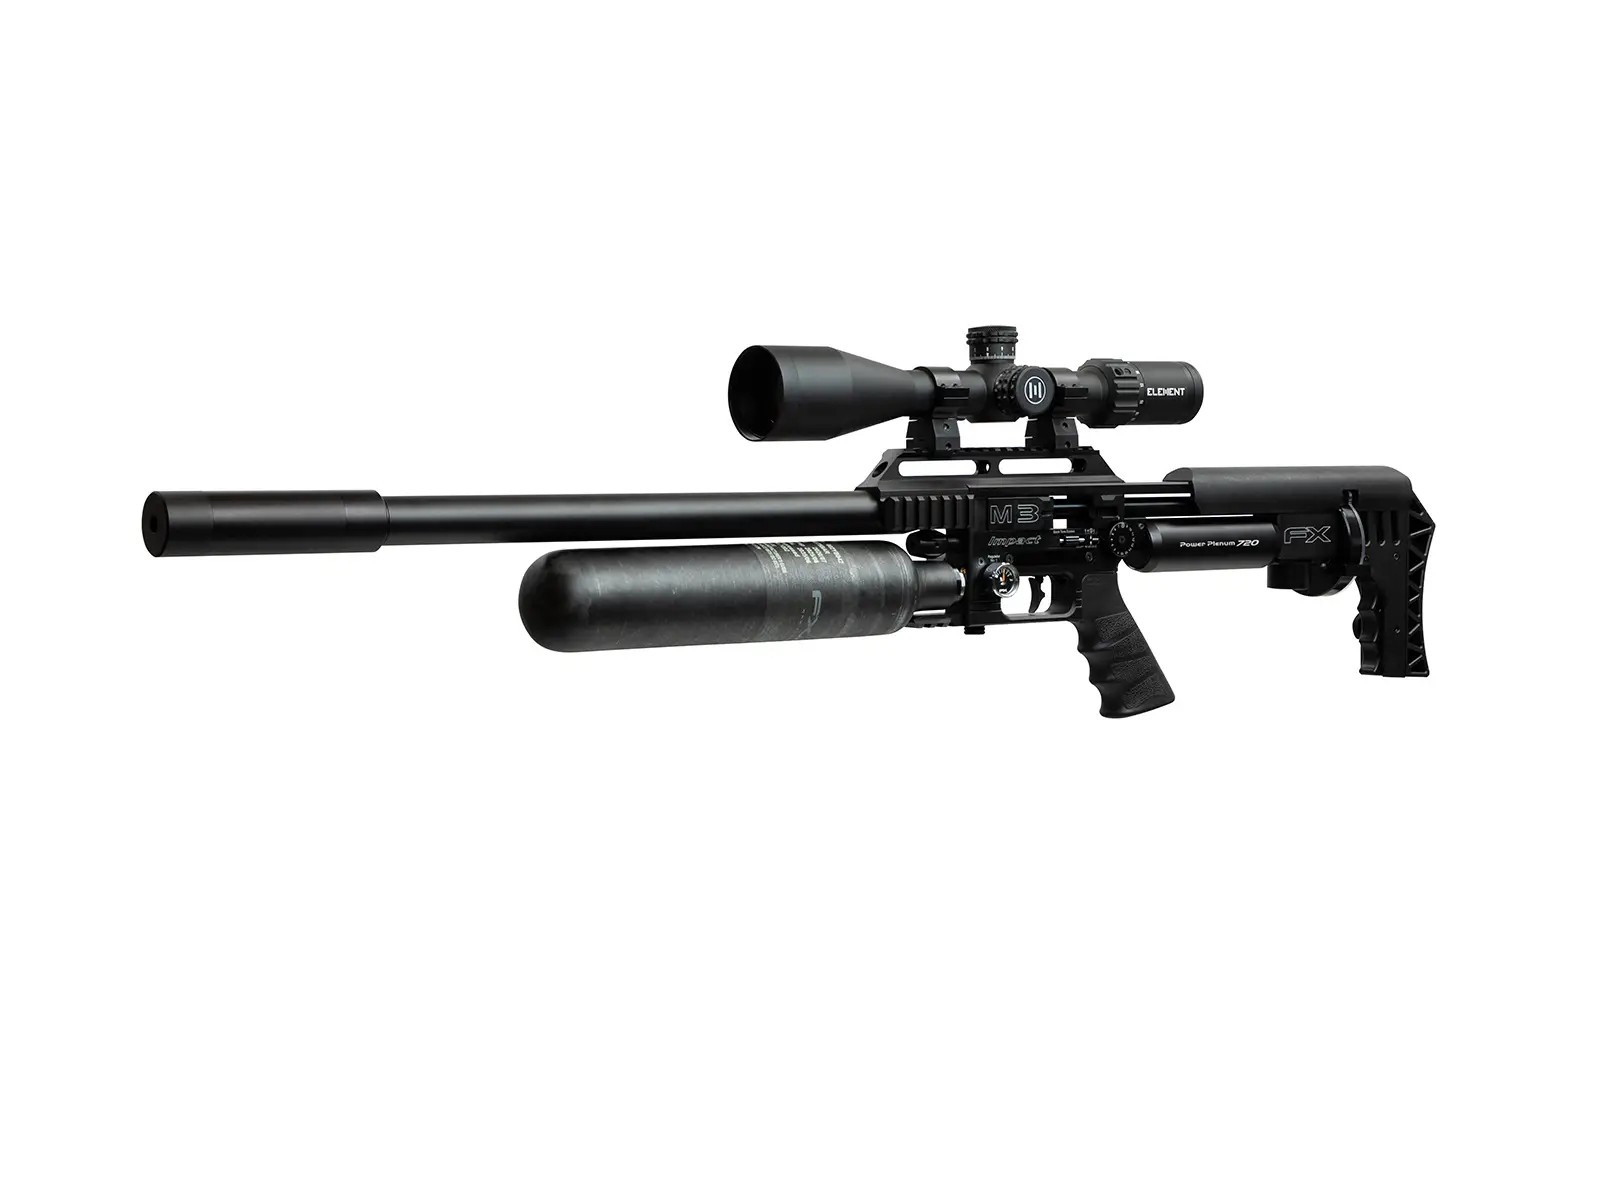 f22 Best PCP air rifles - 11 of the best PCP guns you can buy right now (Reviews and Buying Guide 2023)